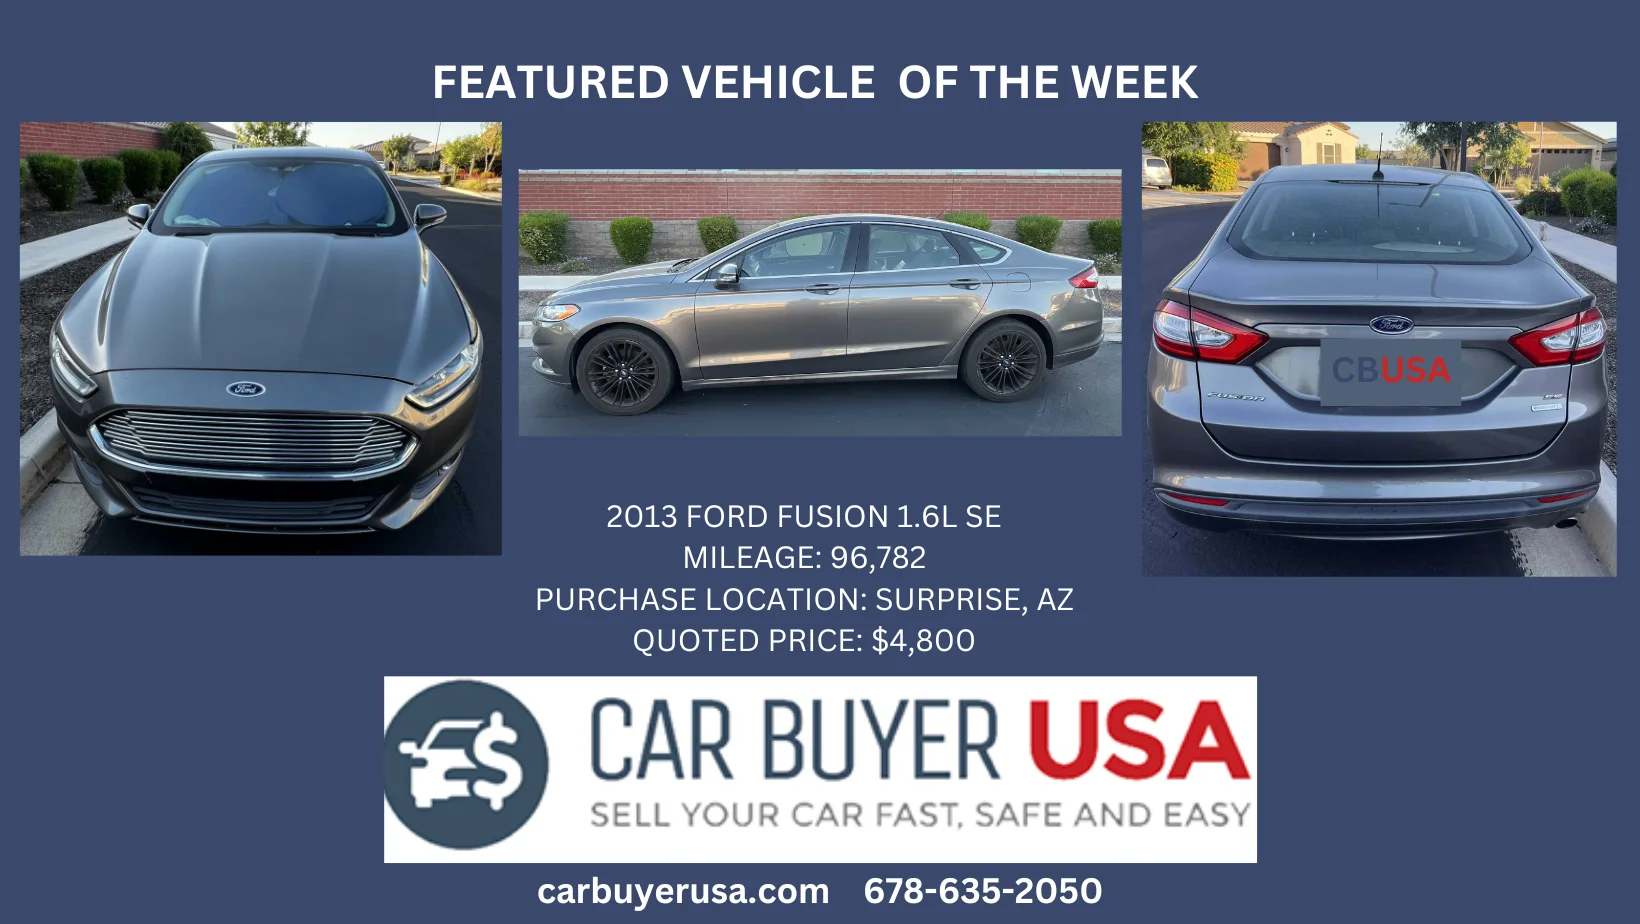 Car Buyer USA - 2013 FORD FUSION 1.6L SE  - $4,800